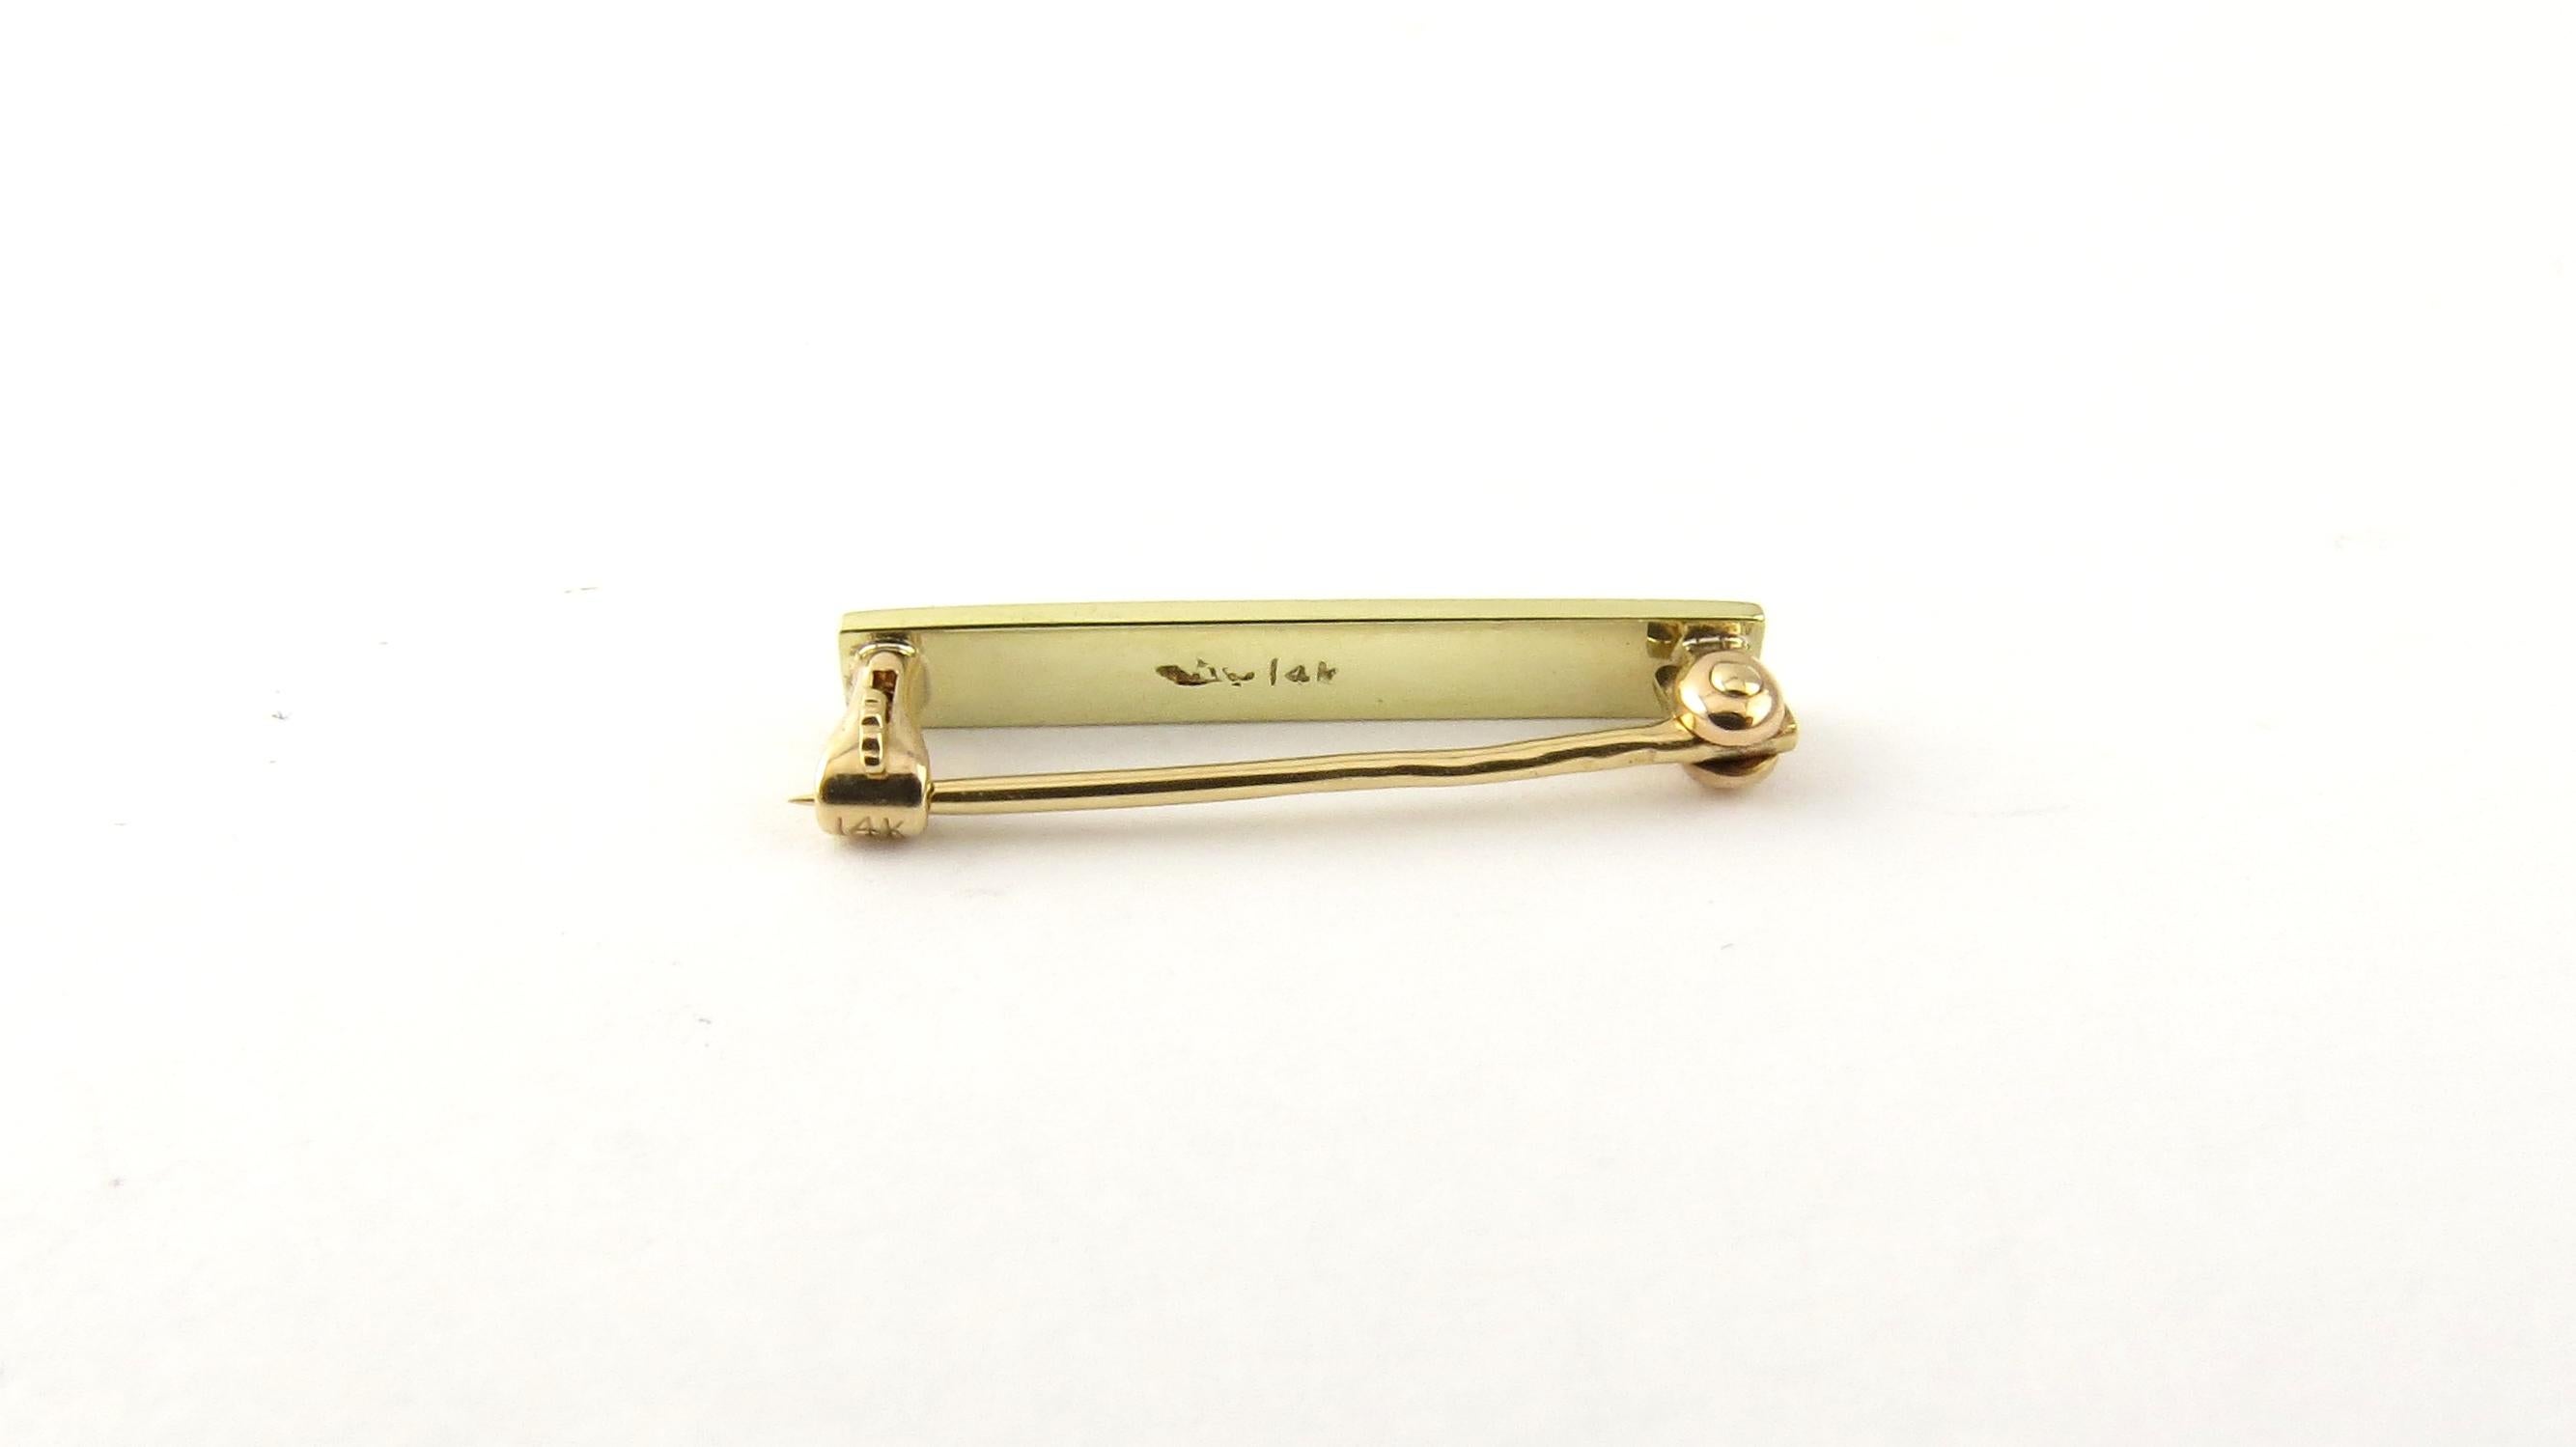 Vintage 14 Karat Yellow Gold and Enamel Baby Pin.

This dainty pin features a lovely pink enamel design meticulously detailed in 14K yellow gold.

Size: 20 mm x 3 mm

Weight: 0.5 dwt. / 0.7 gr.

Stamped: 14K

Very good condition, professionally